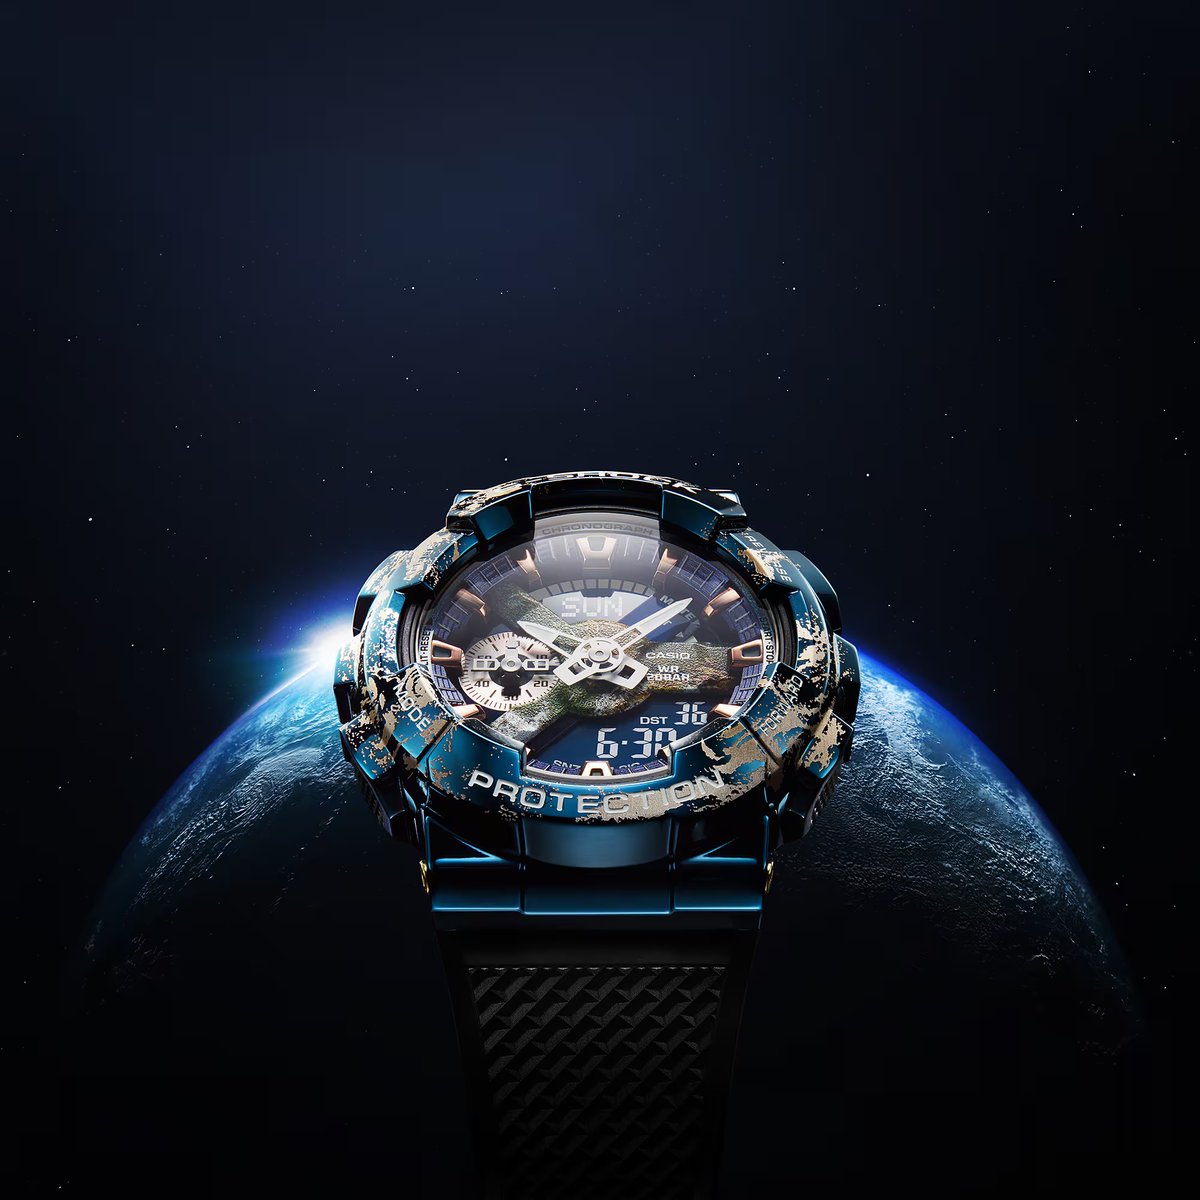 In honor of our shared home, G-Shock's ion-plated reproduction of Earth on the bezel and watch face. Last one in stock!

altivo.com/products/gm-11…

#earthday #EarthDay2024 #GShock #gshockcollector #gshocklover #gshockwatch #gshockwatches #sportswatch #MensAccessories #MensWatches